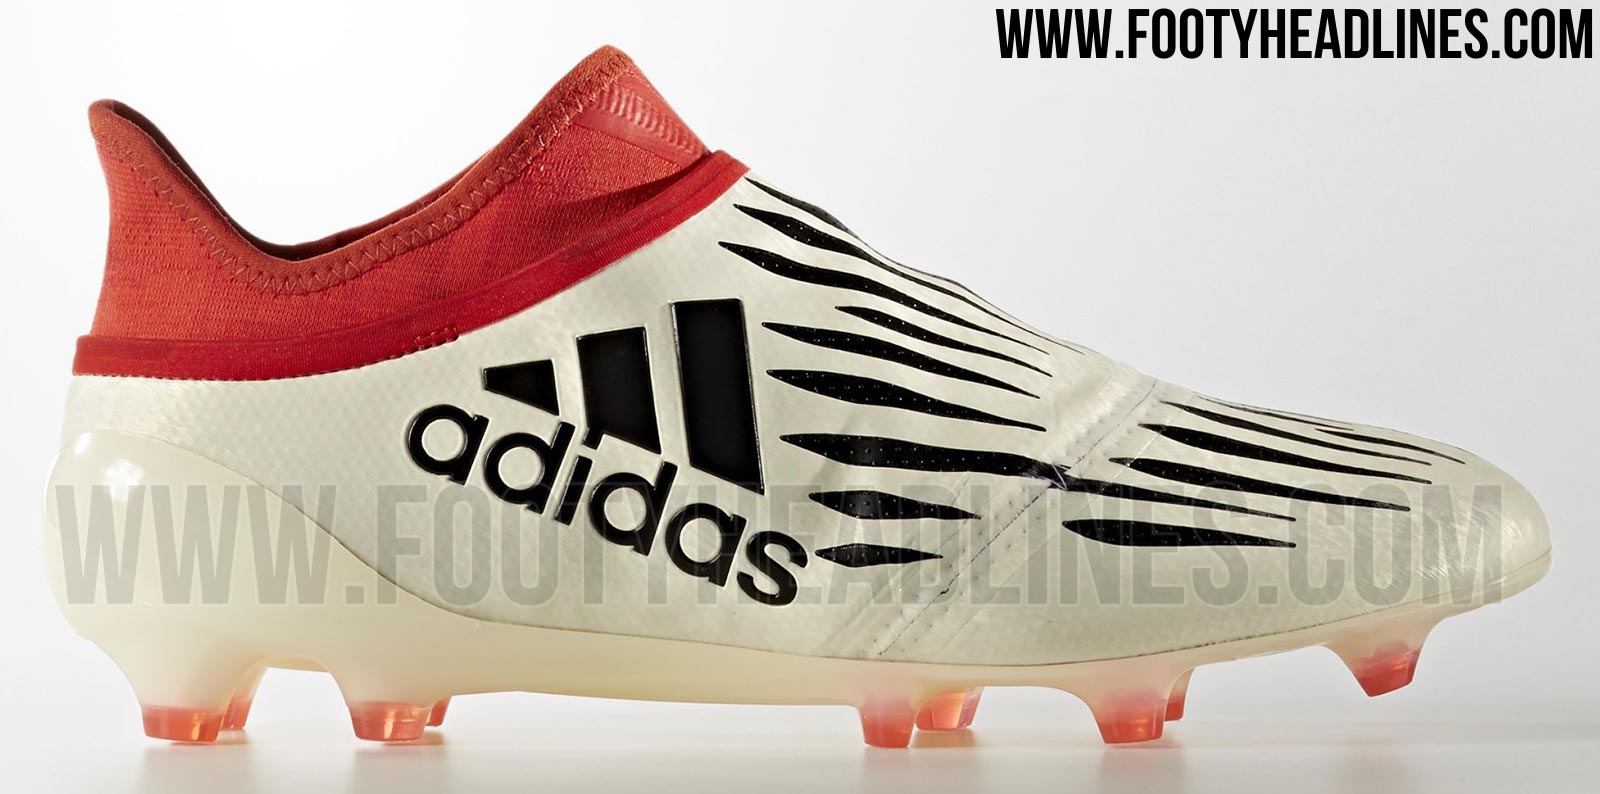 Full Adidas Champagne Pack Revealed + How to Buy Footy Headlines